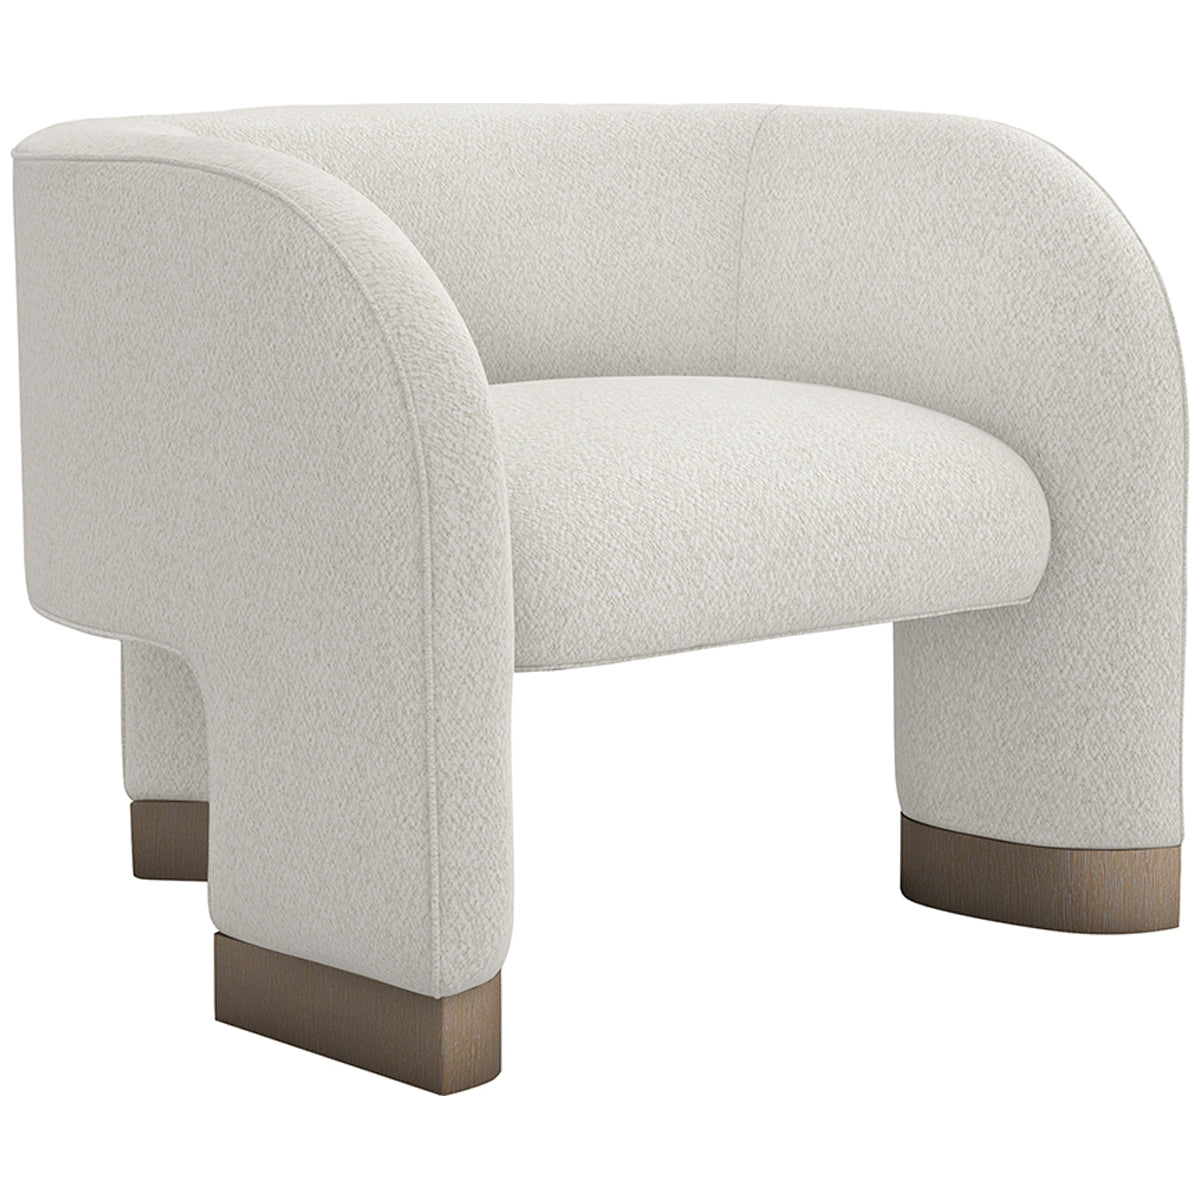 Interlude Home Trilogy Chair